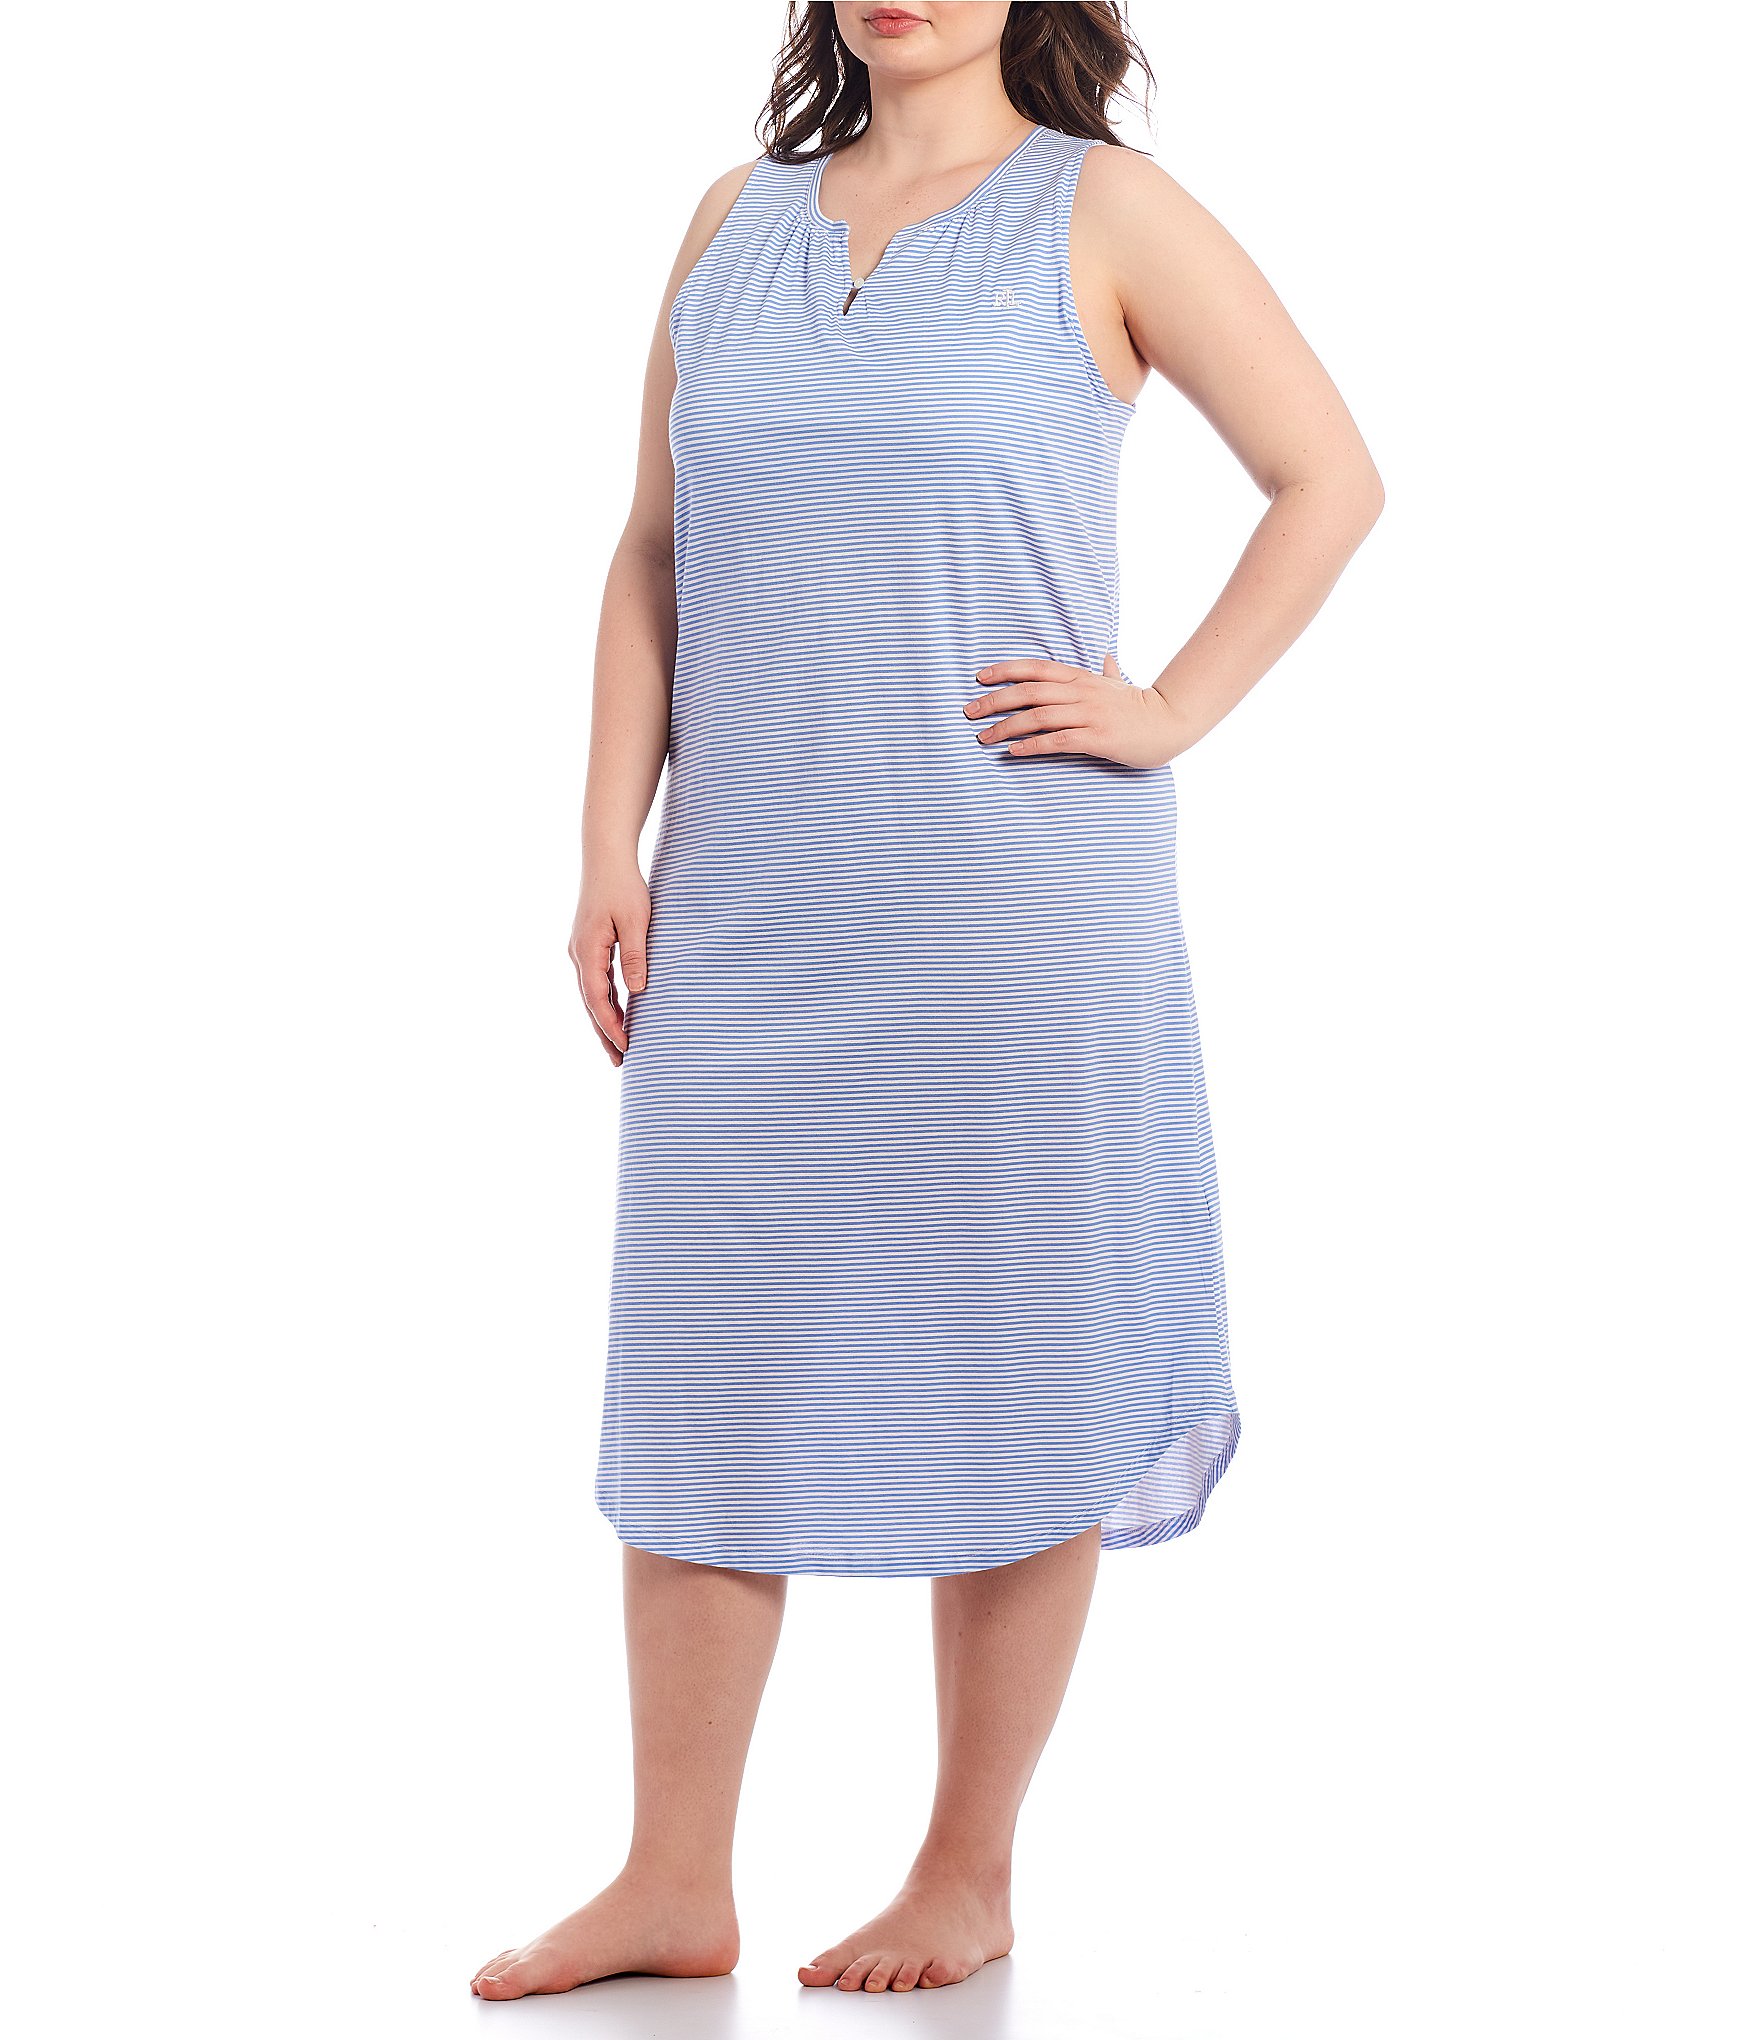 Women's Old Fashioned Soft Cotton Floral Nightgown – Latuza